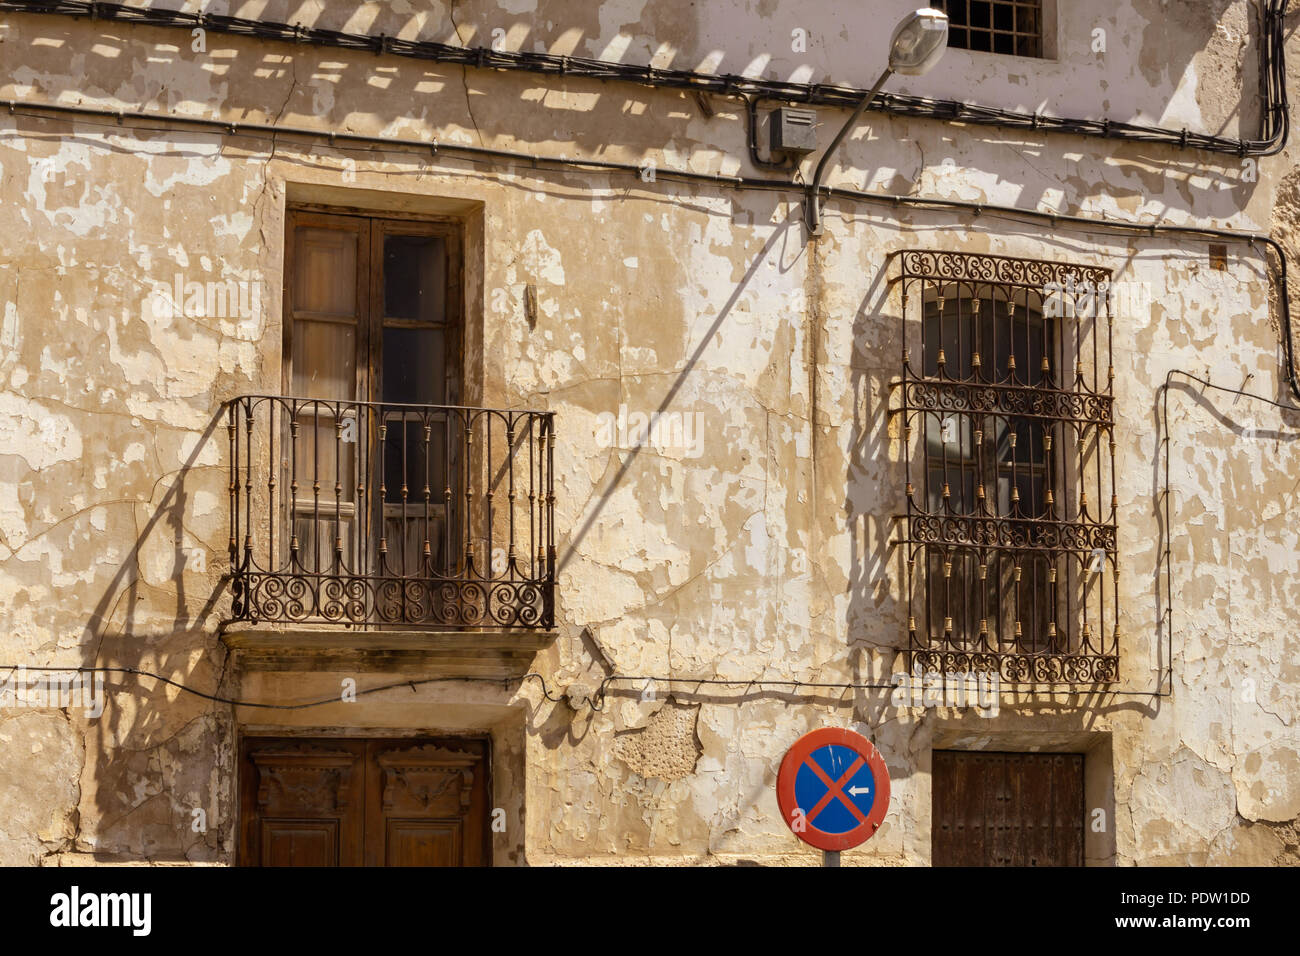 Spanish Houses Empty in a Small Rural Town in Andalucia Spain Stock Photo